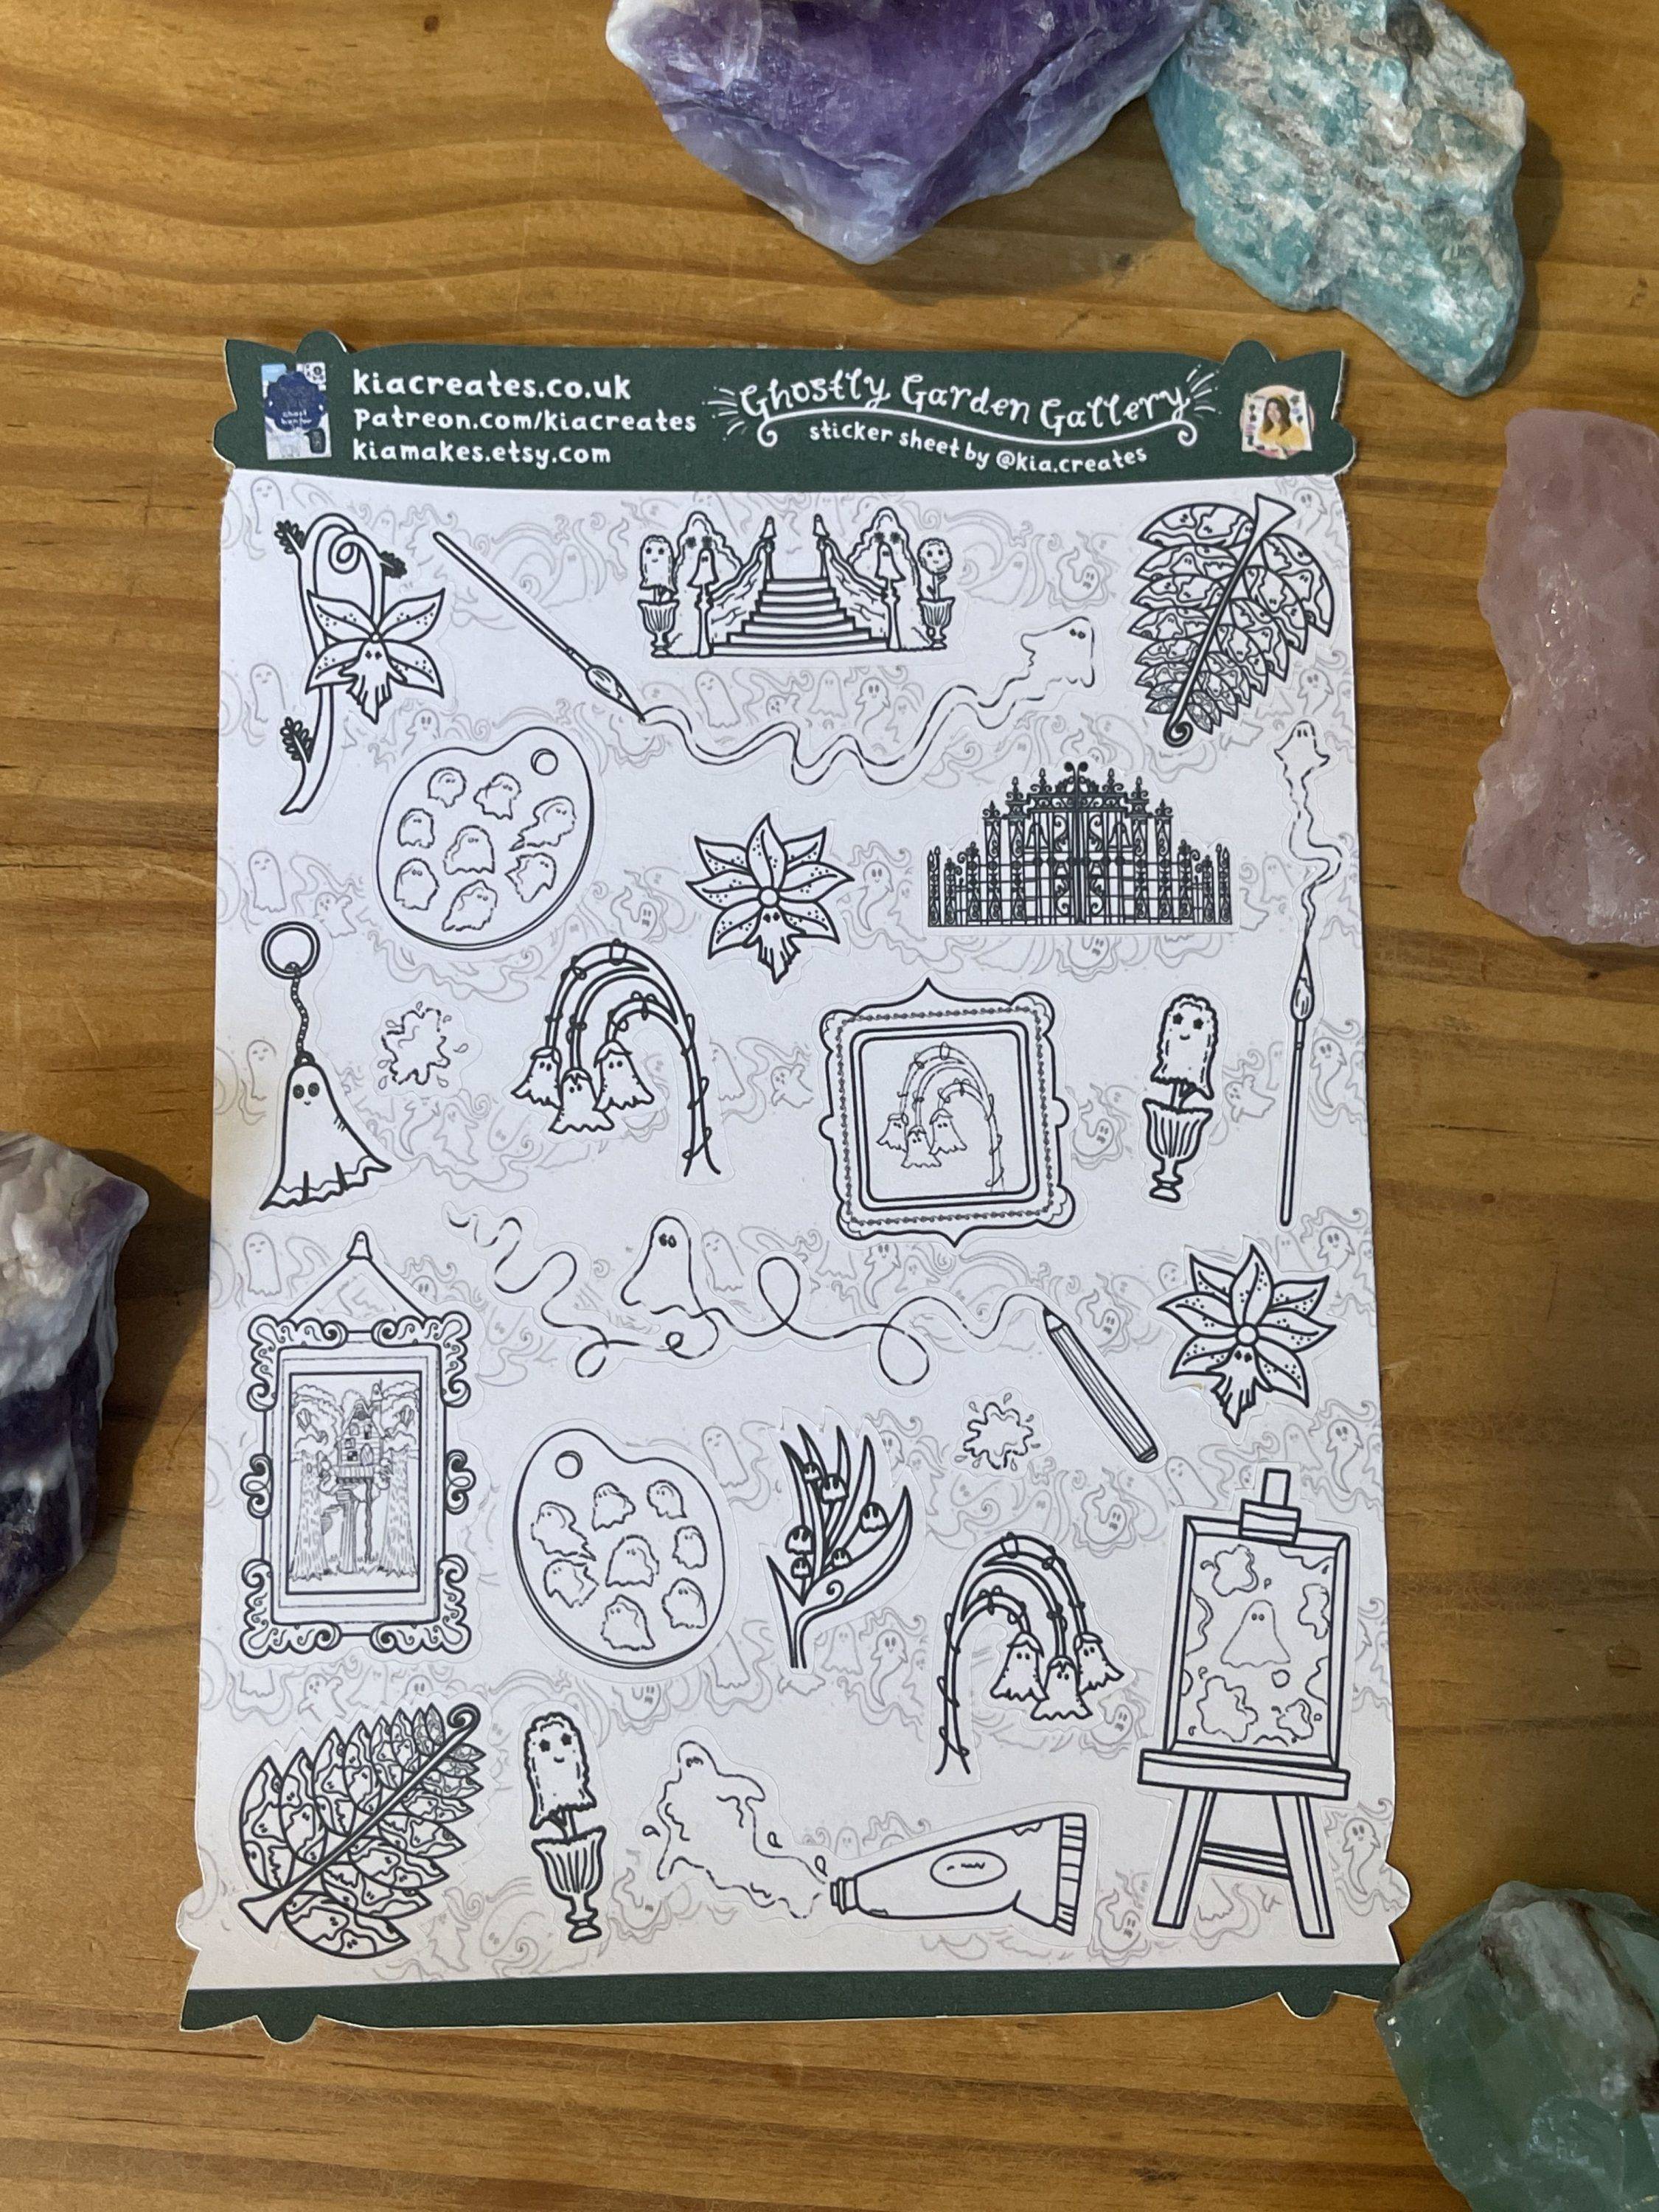 Ghostly Garden Gallery stickers: capture the spirit of the outdoors with a spot of plein air painting in the haunted gardens of the ghostly Wight Manor.